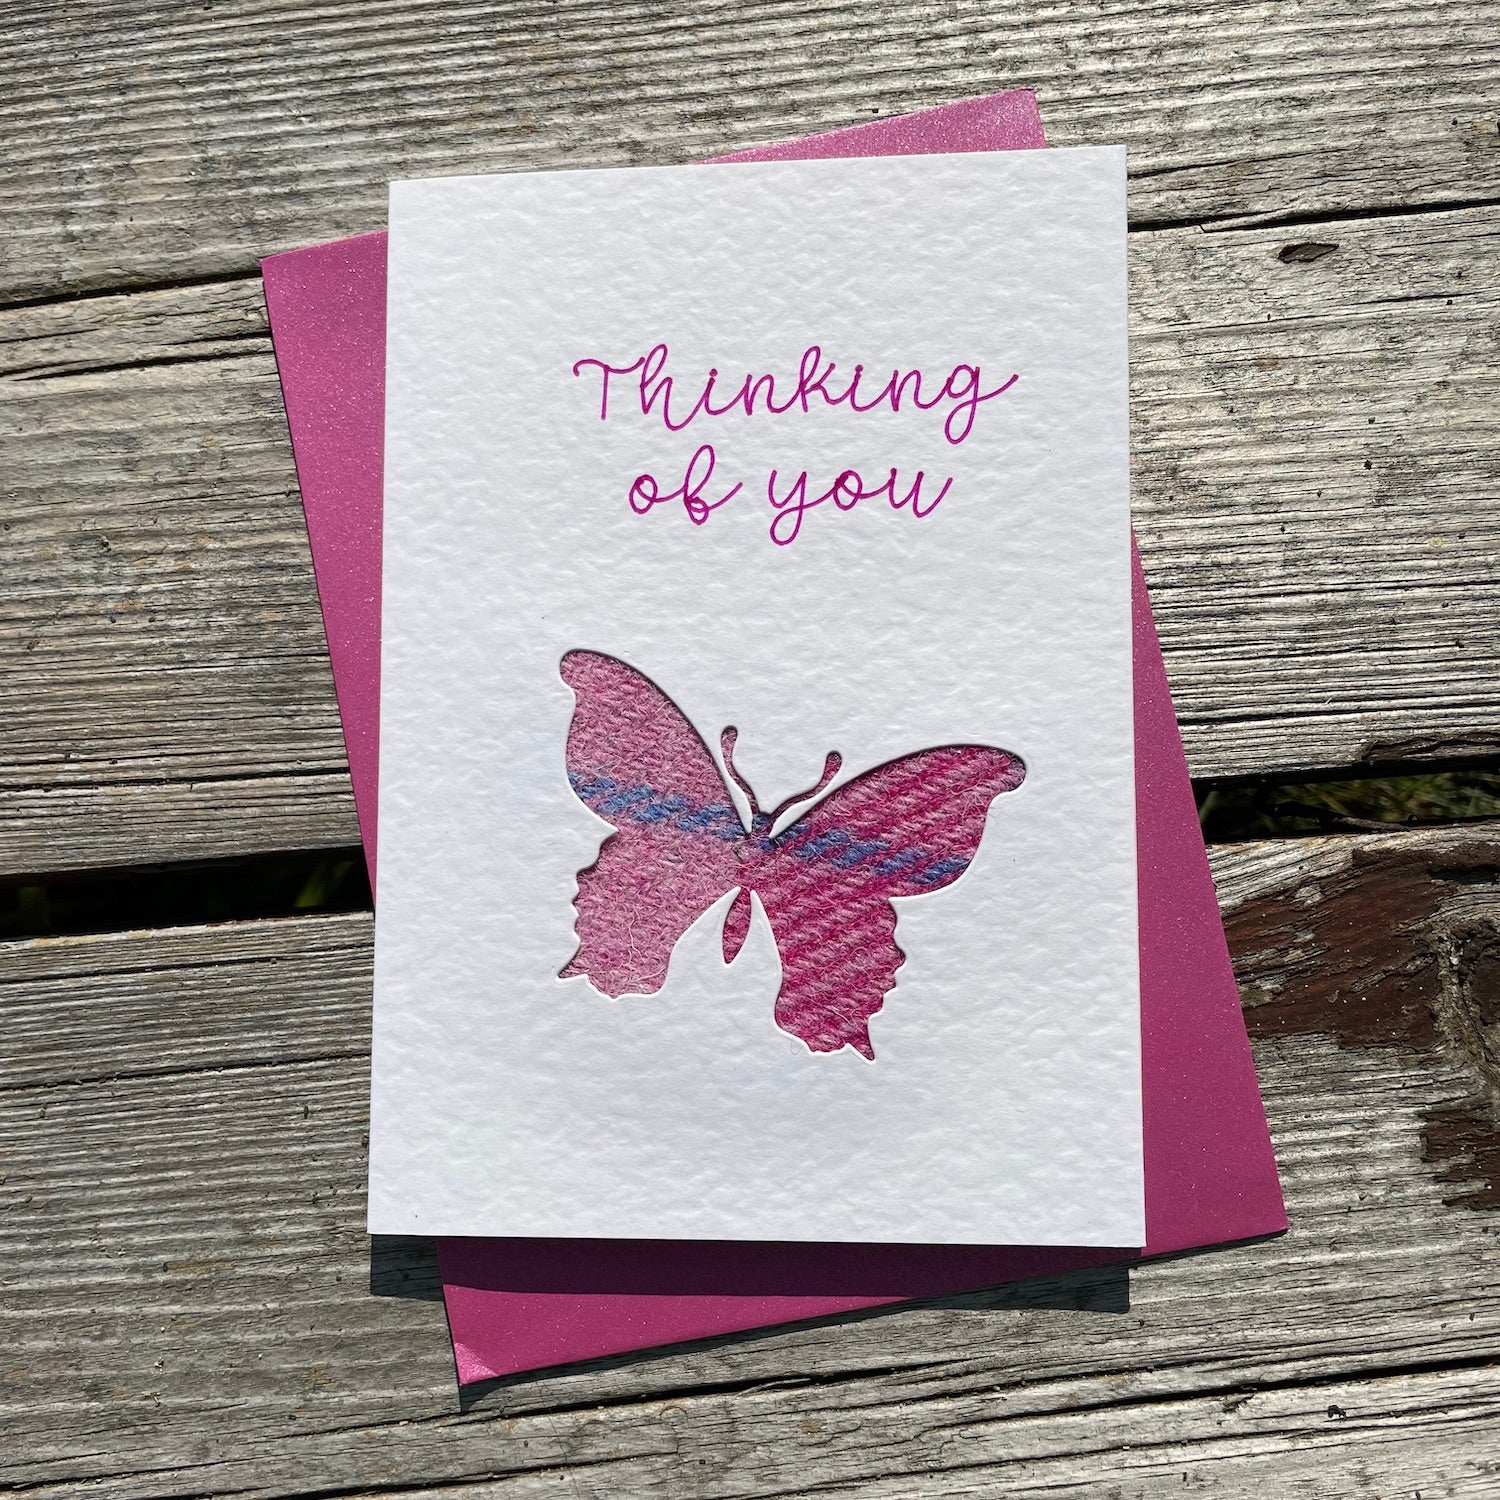 Handmade Scottish Greeting Card featuring Harris Tweed® Butterfly Thinking of you